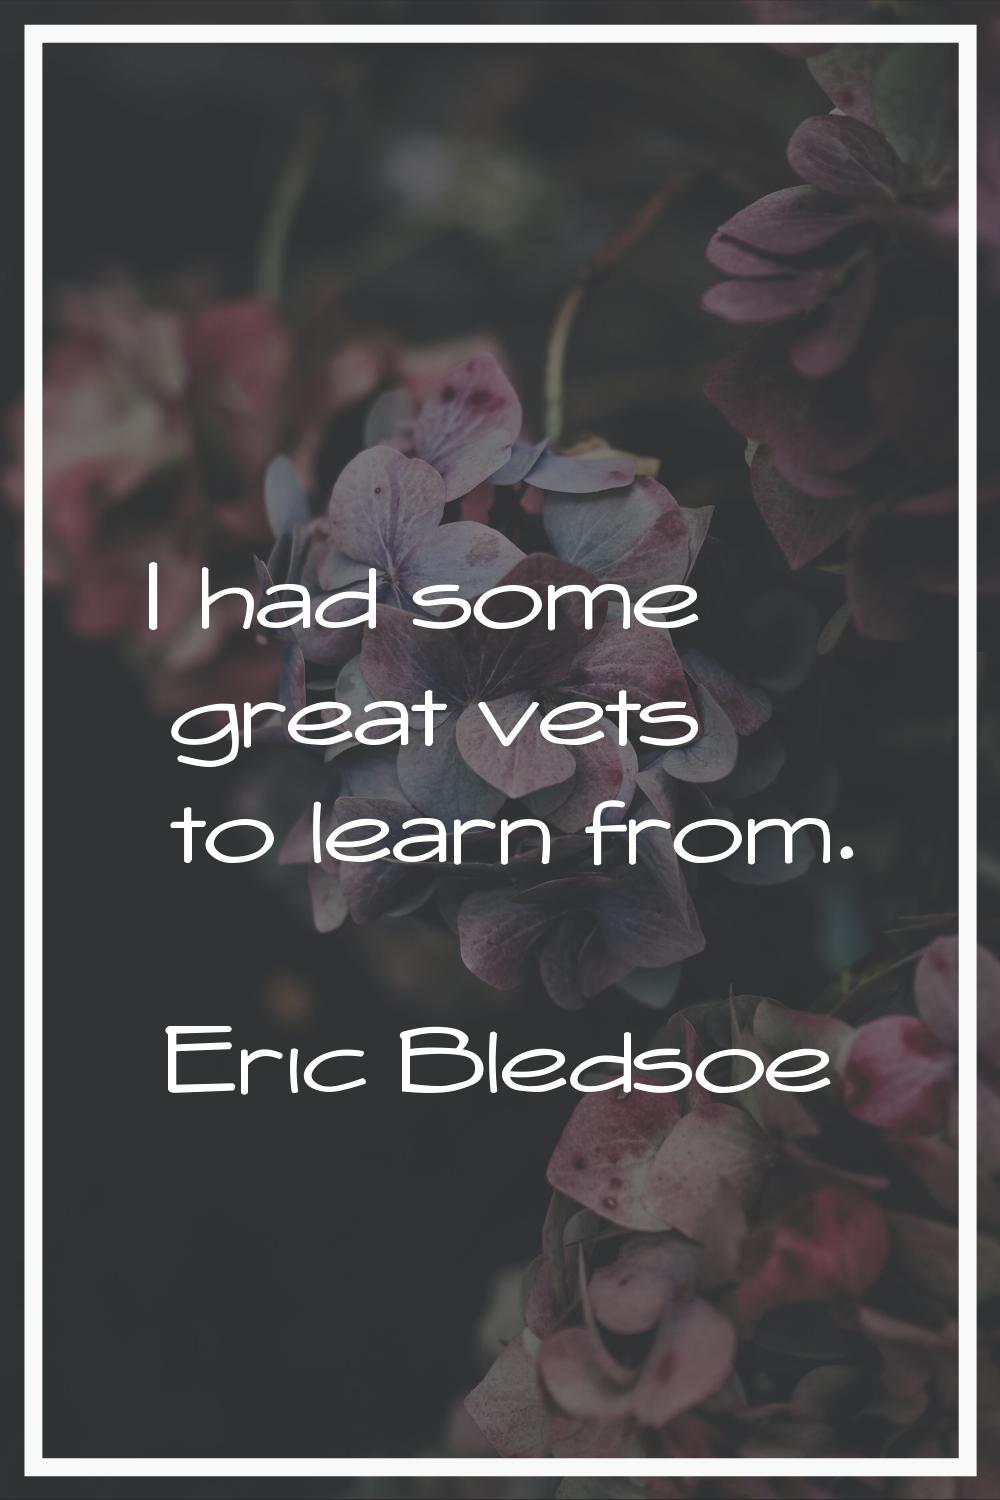 I had some great vets to learn from.